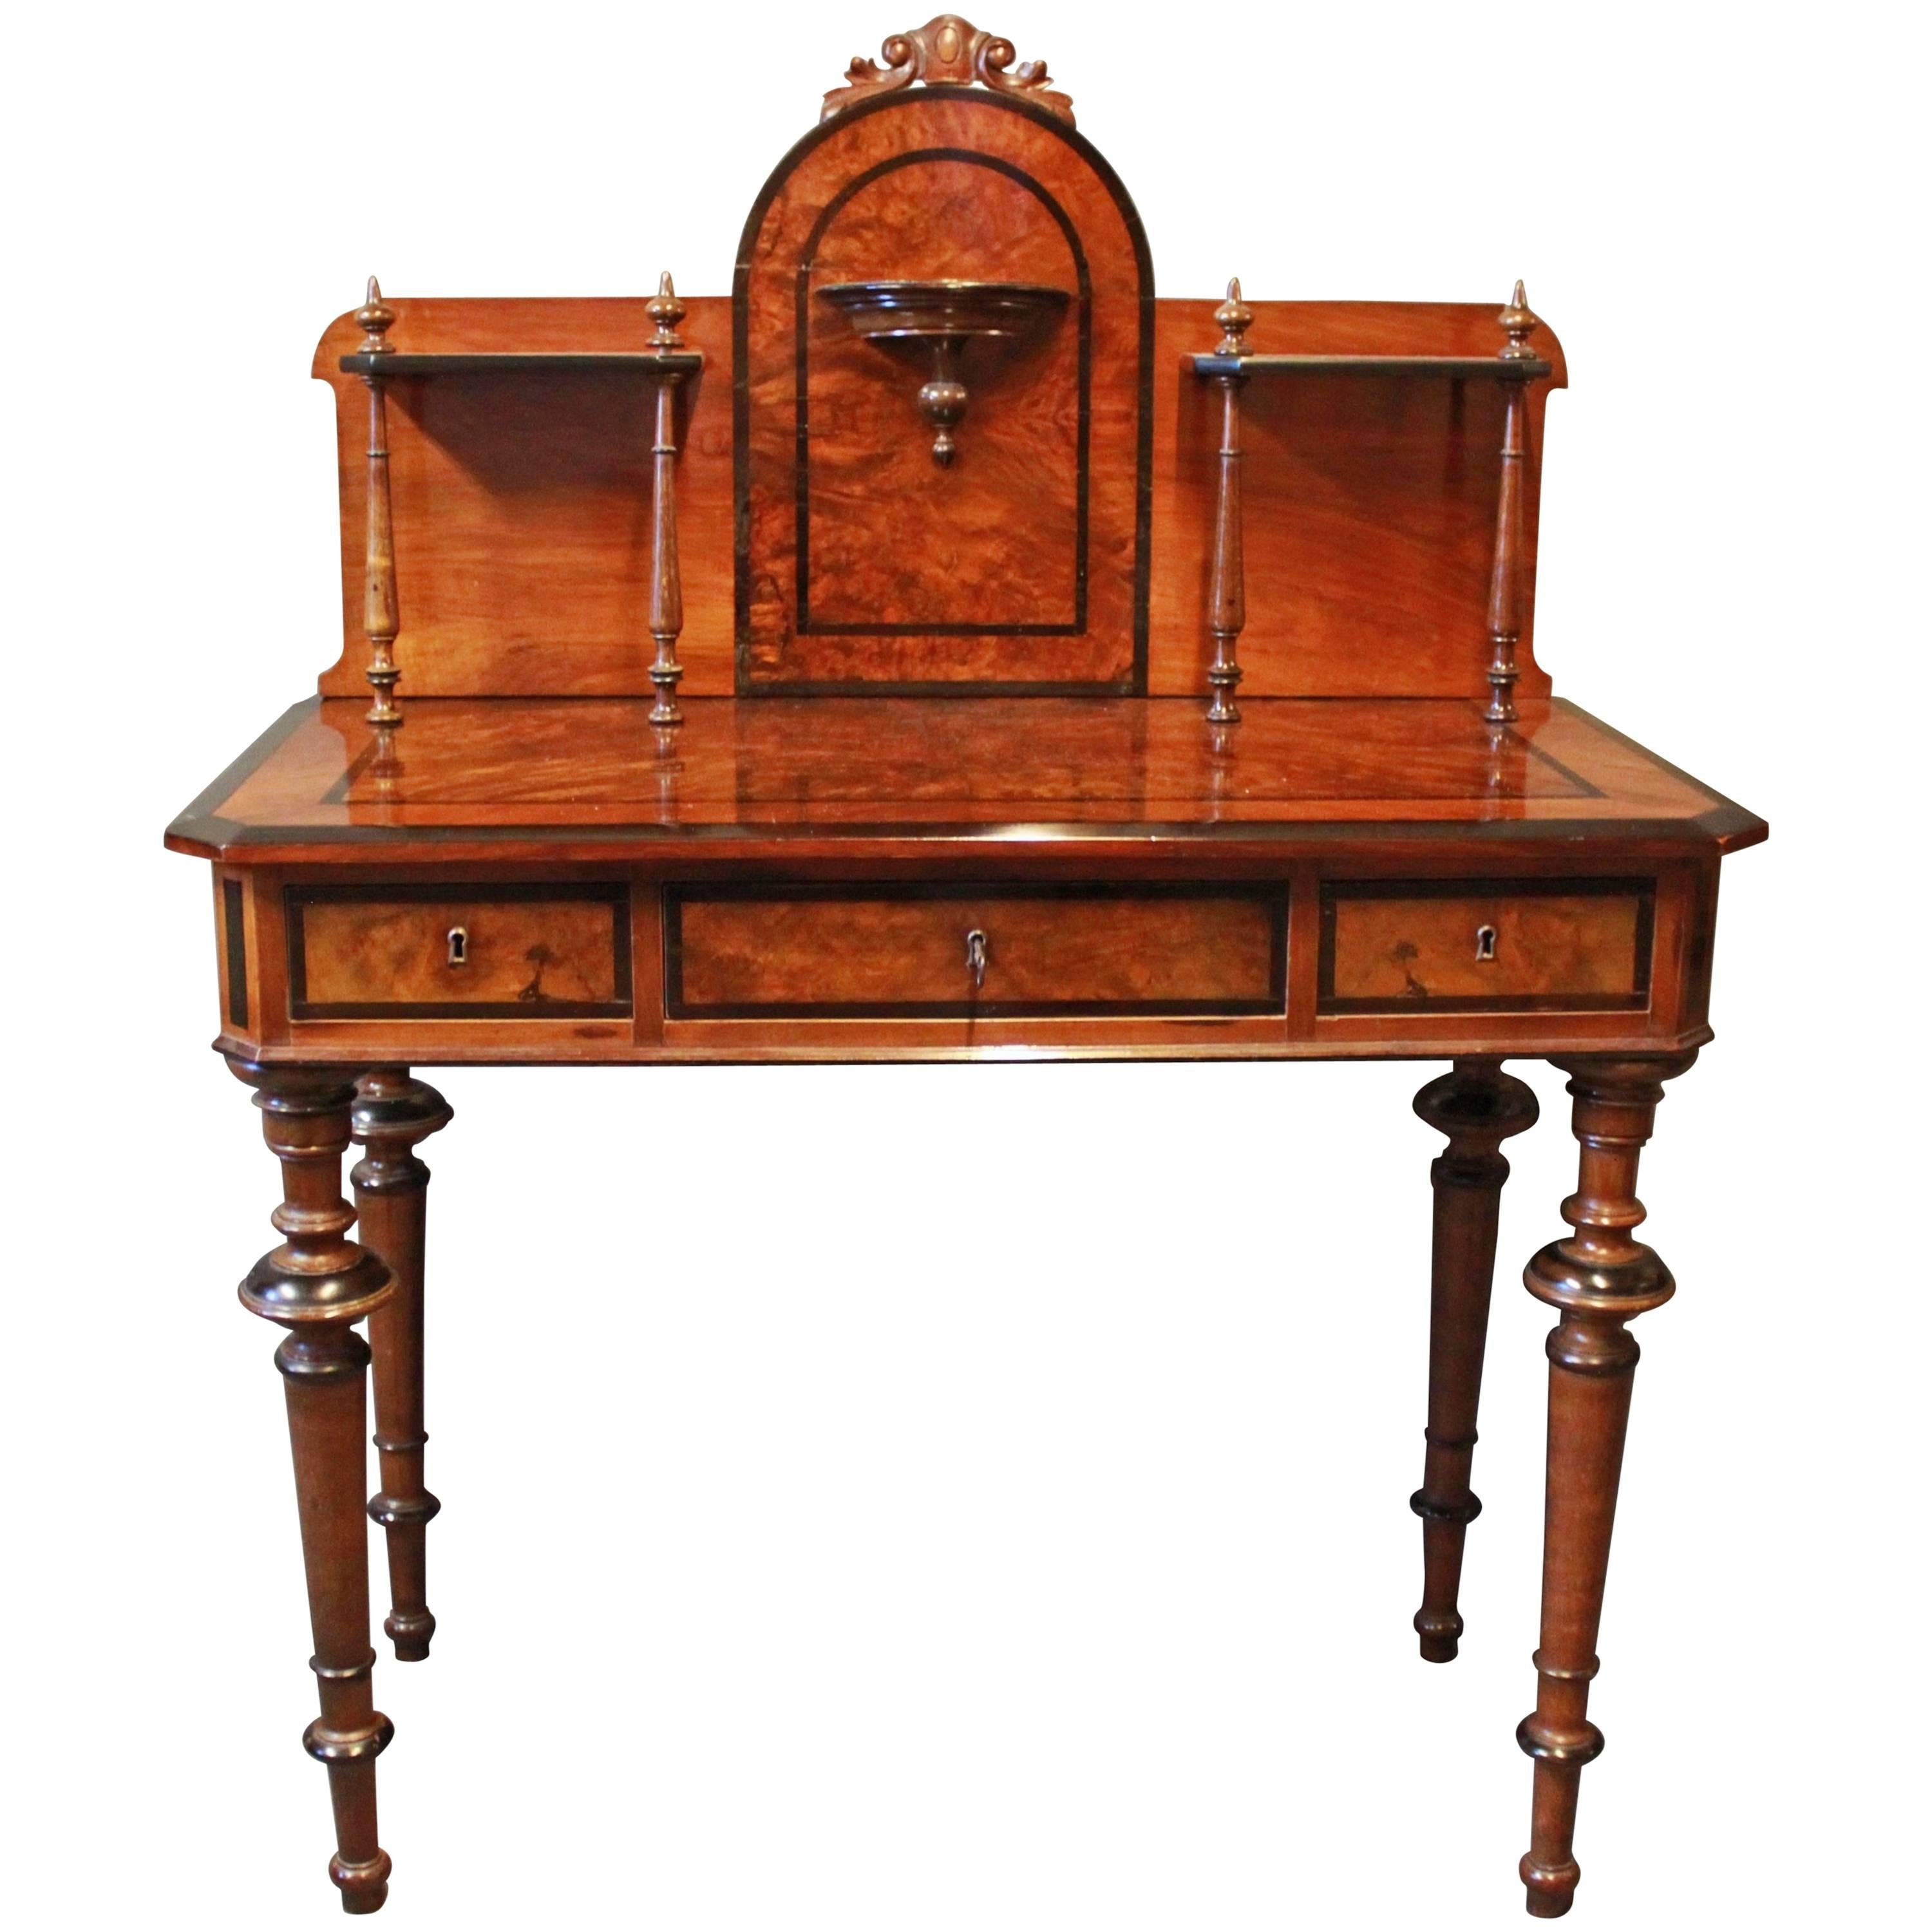 Ladies Desk in Handpolished Walnut from the 1860s